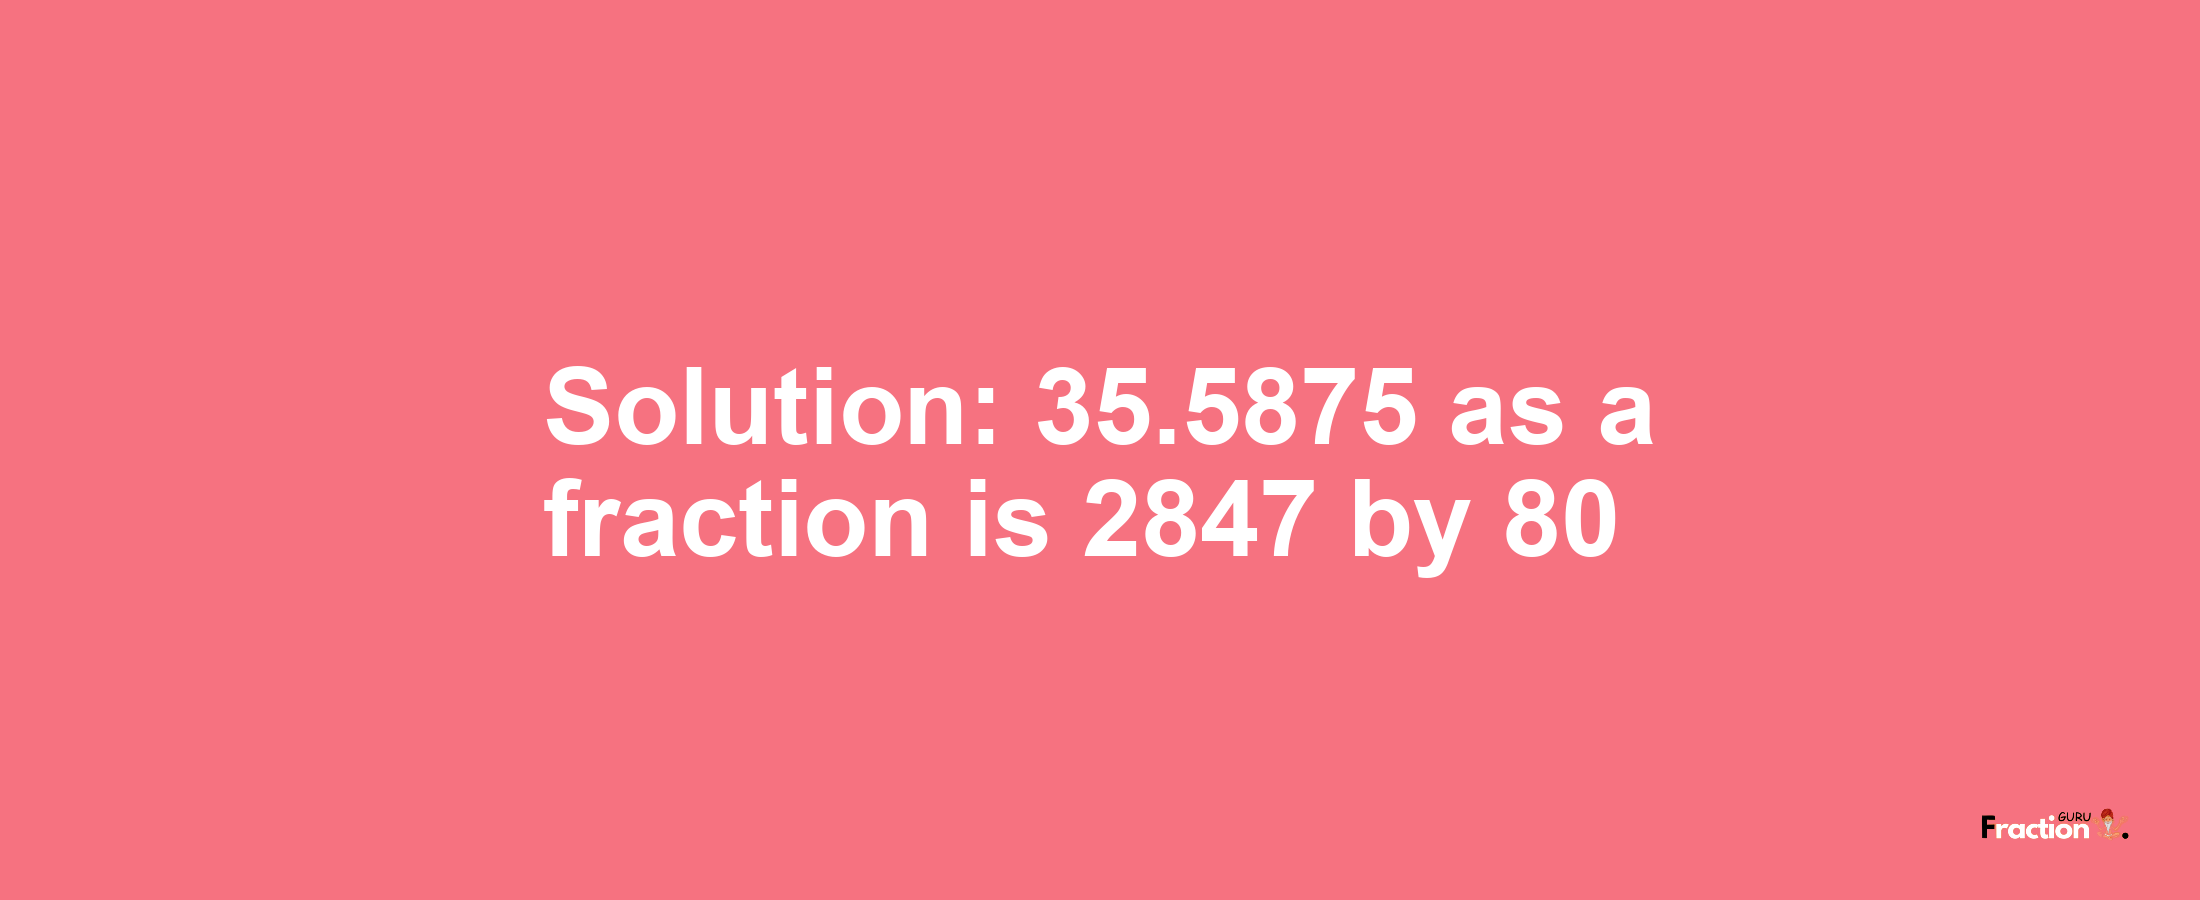 Solution:35.5875 as a fraction is 2847/80